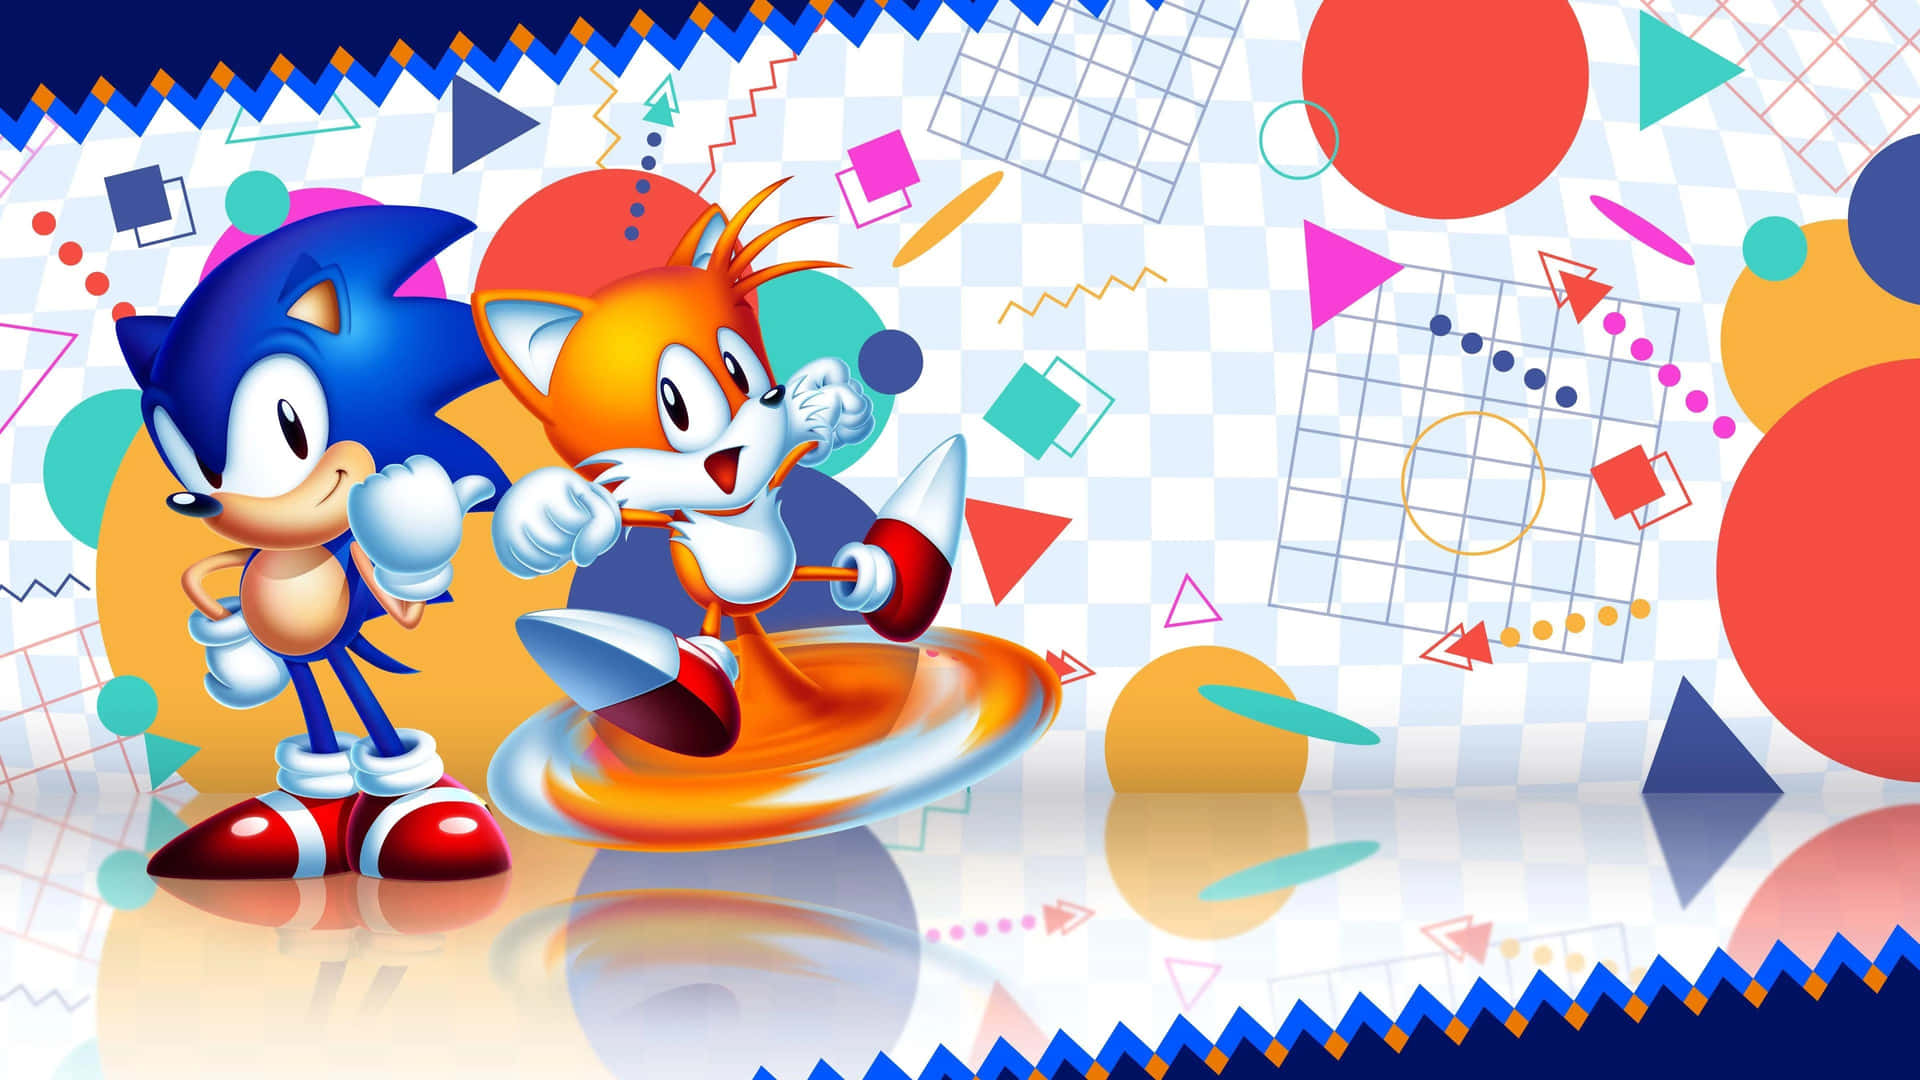 Sonic 2 HD - Sonic The Hedgehog's High Definition Sequel Wallpaper